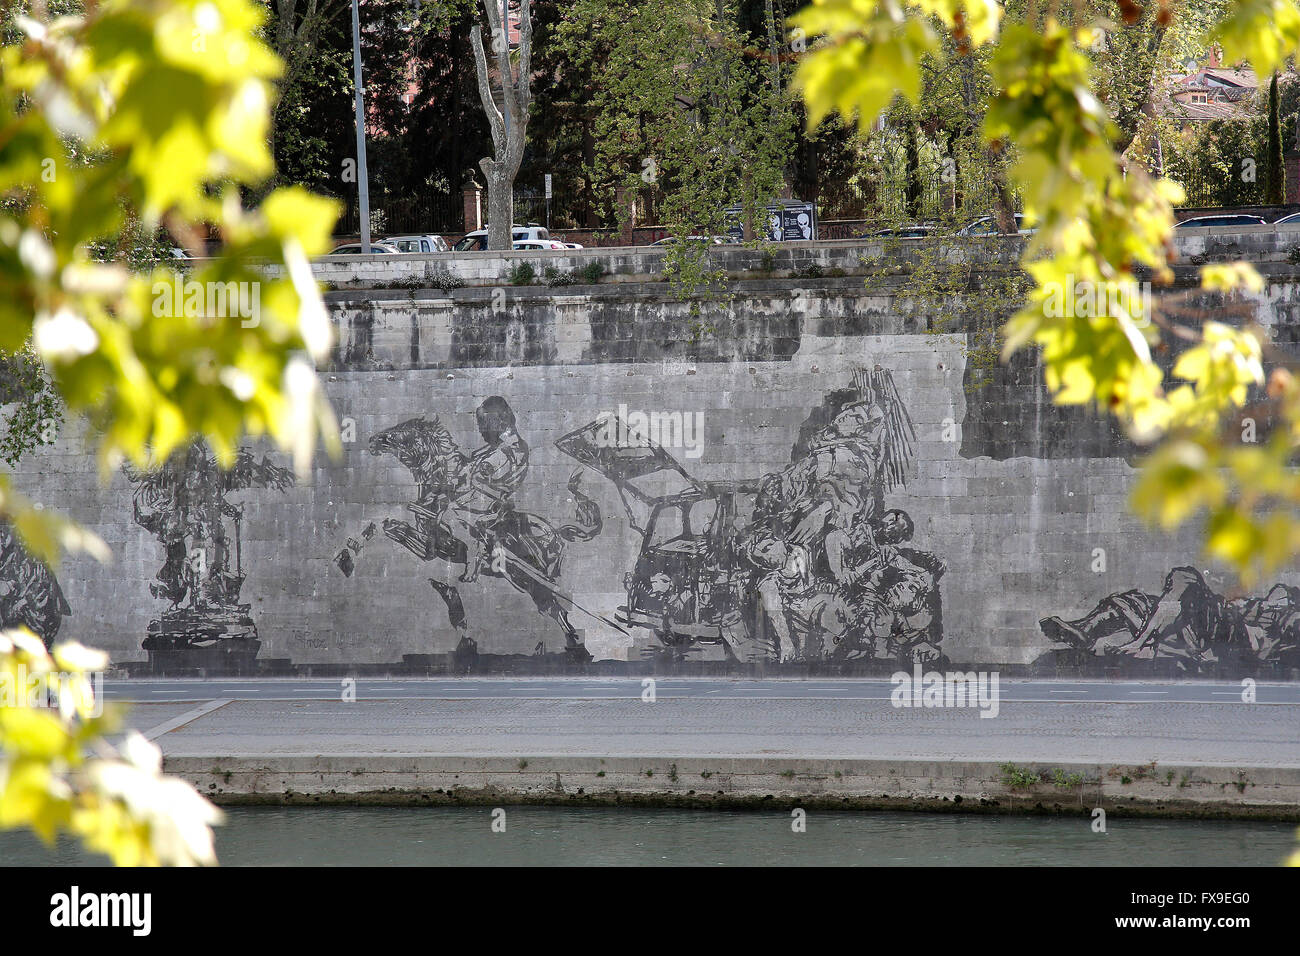 The finding of the body of Aldo Moro, killed by the Red Brigades (Brigate Rosse) in 1978 Rome 12th April 2016. The longest series of murals in Rome was just ended along the river Tiber by the South African artist William Kentridge, titled 'Triumphs and Laments'. The artist used a very simple, ecologic technique to realize the paintings: he 'cleaned' the layer of smog covering the walls along the river with vapor. The mural, 550mt long and made of 80 figures 10mt tall, tells the story, made of Triumphs and Laments, of Rome. Stock Photo